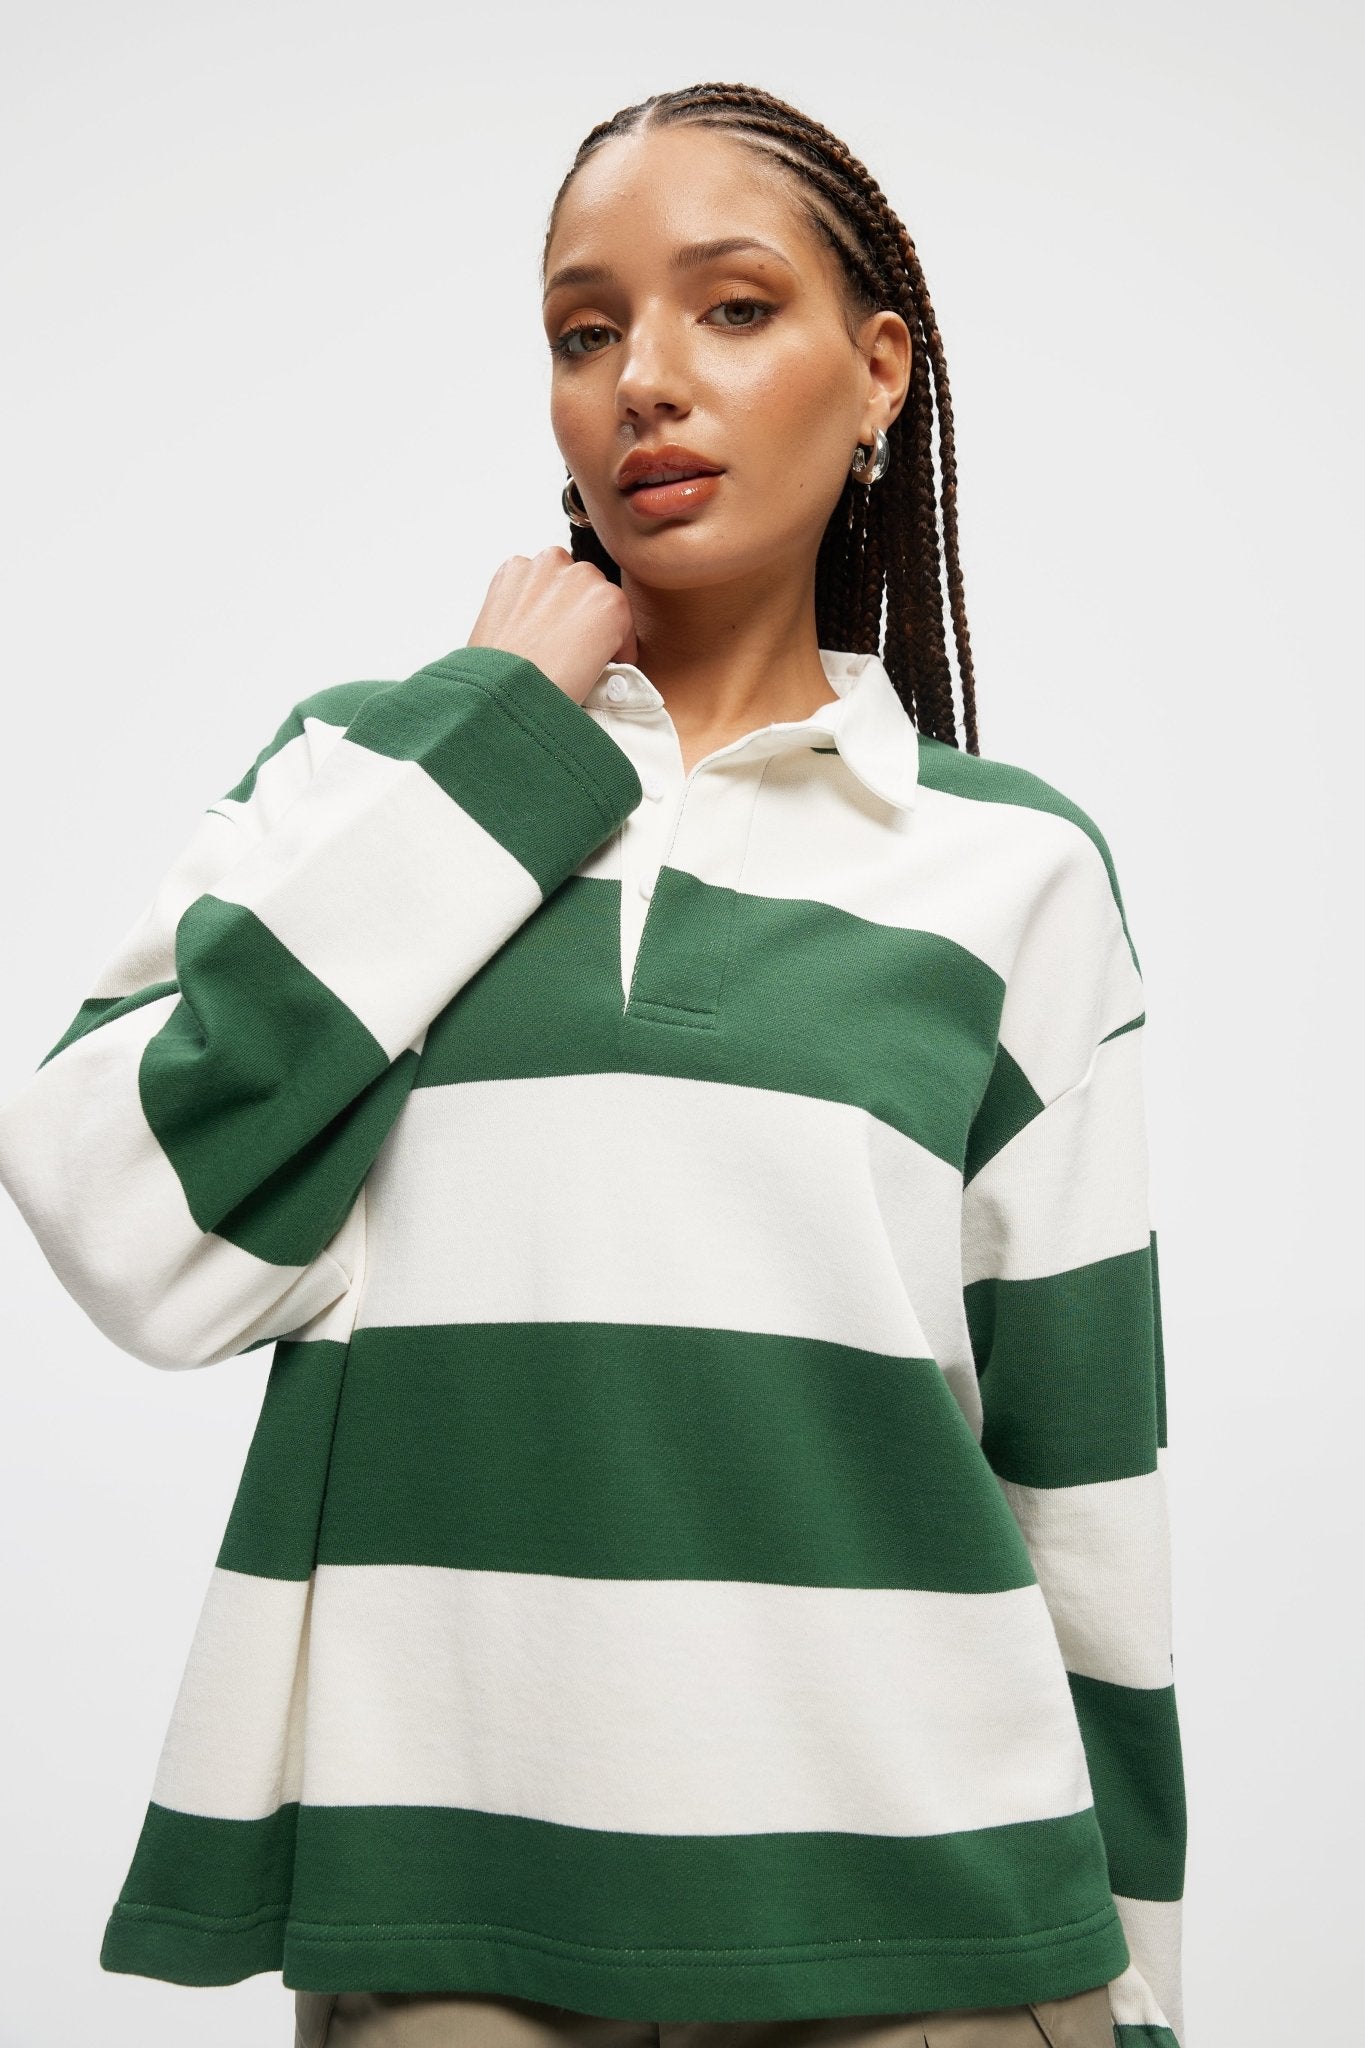 Cropped Rugby Shirt